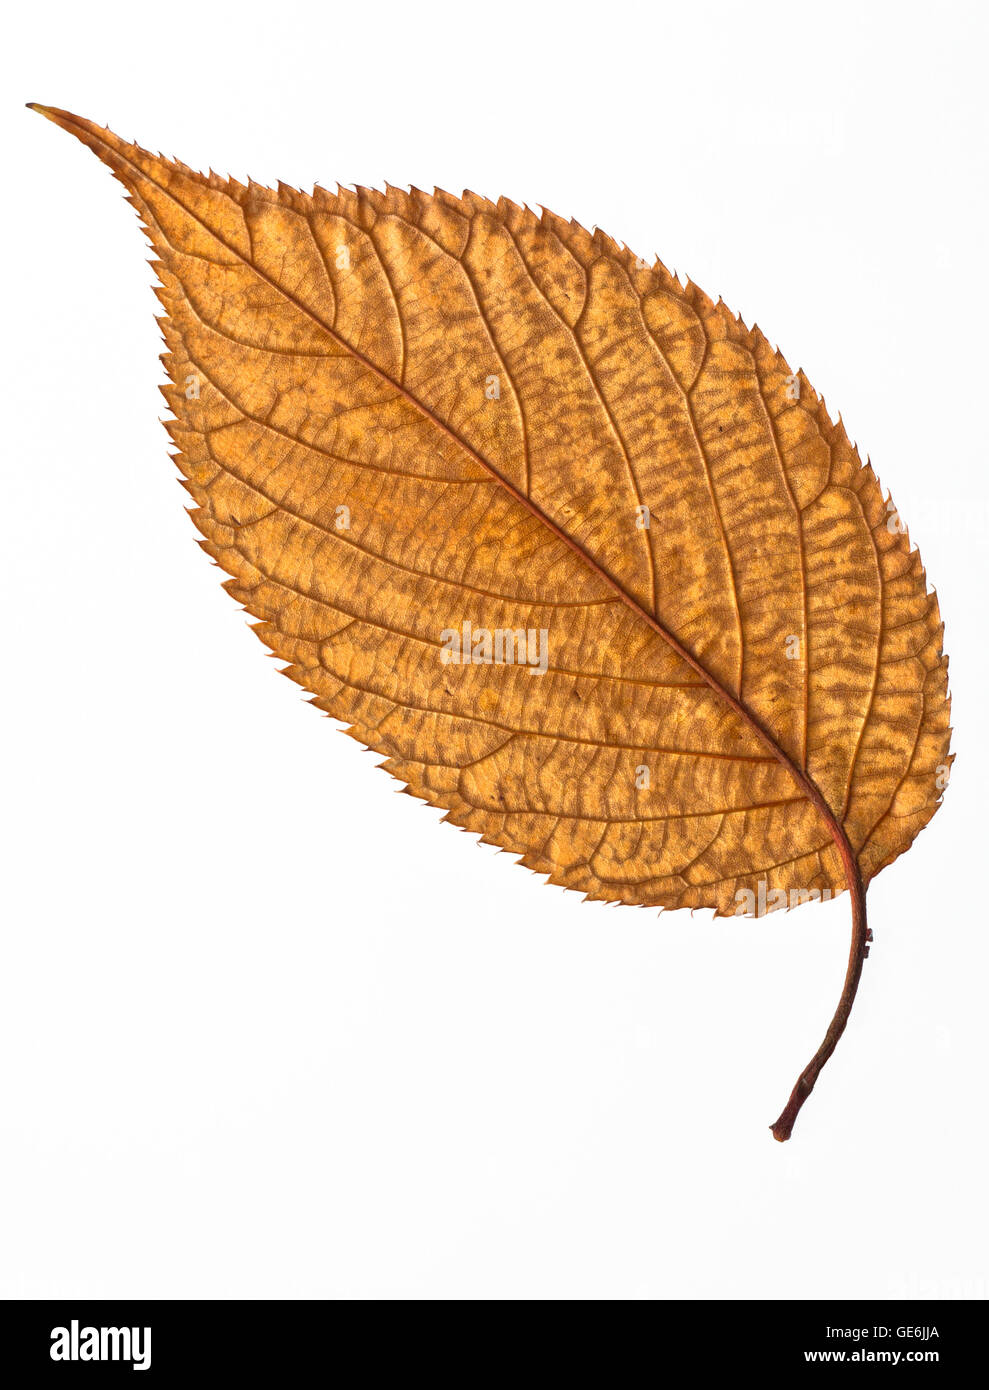 reverse side of pressed brown leaf, showing veins and details Stock Photo